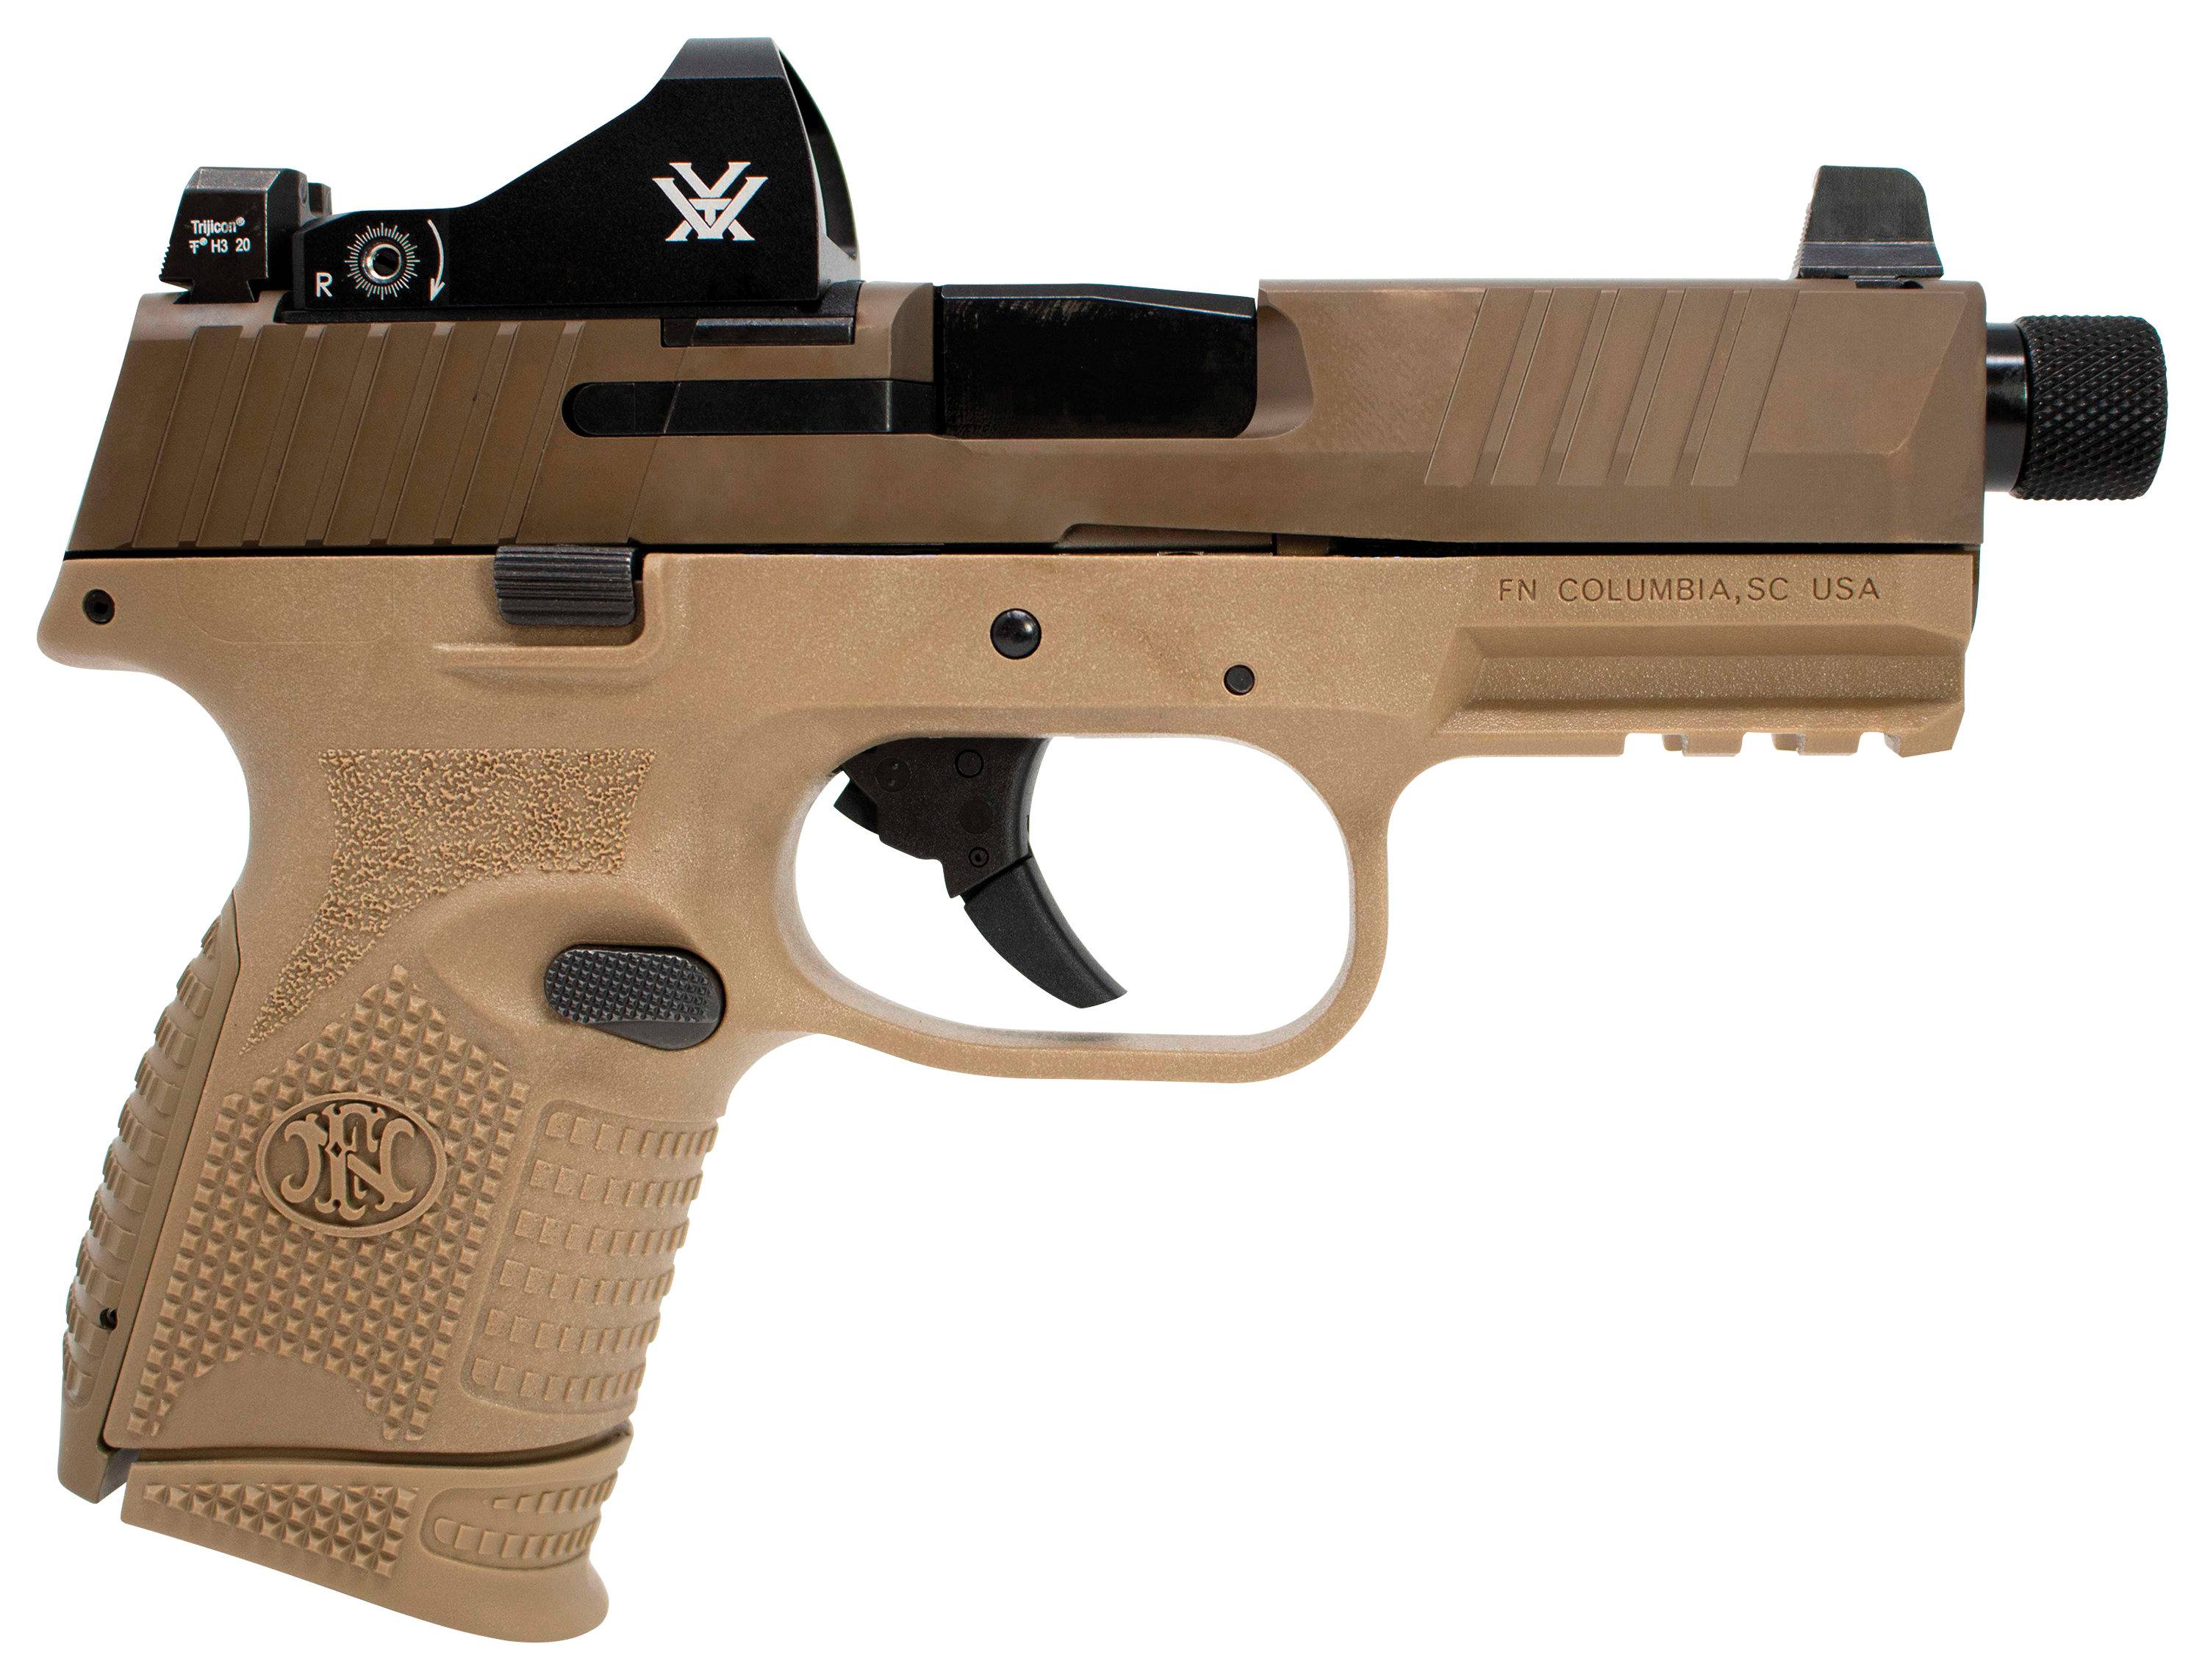 FN 509c Compact Tactical Semi-Auto Pistol in FDE with Vortex Viper Micro  Red Dot Sight Package